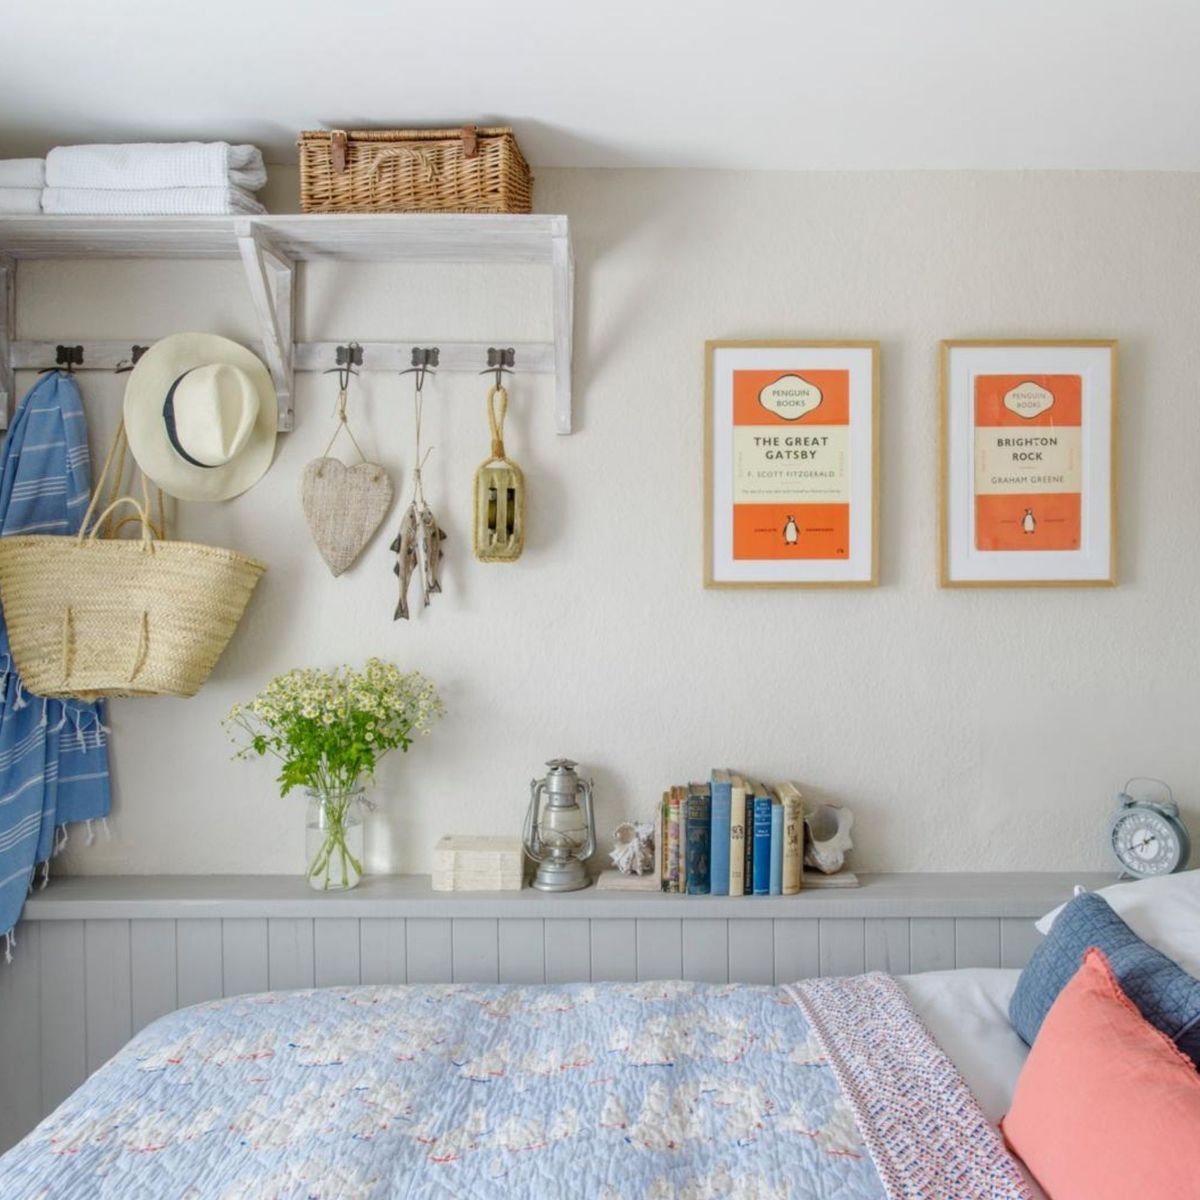 25 small bedroom ideas for a truly gorgeous (and tiny!) sleep space